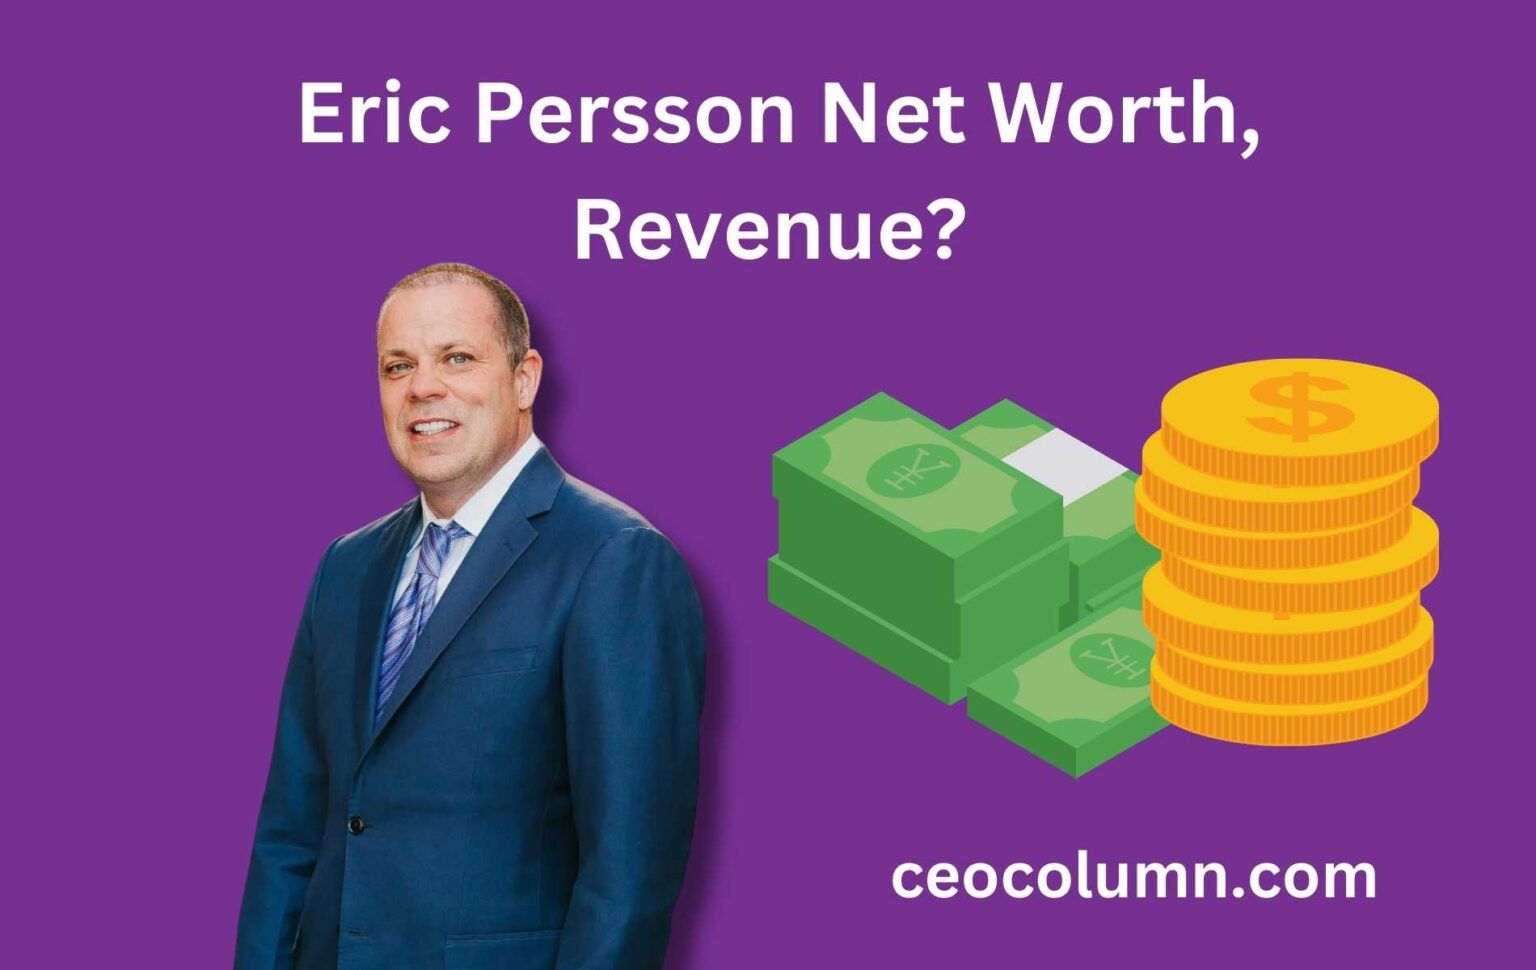 Eric Persson Net Worth